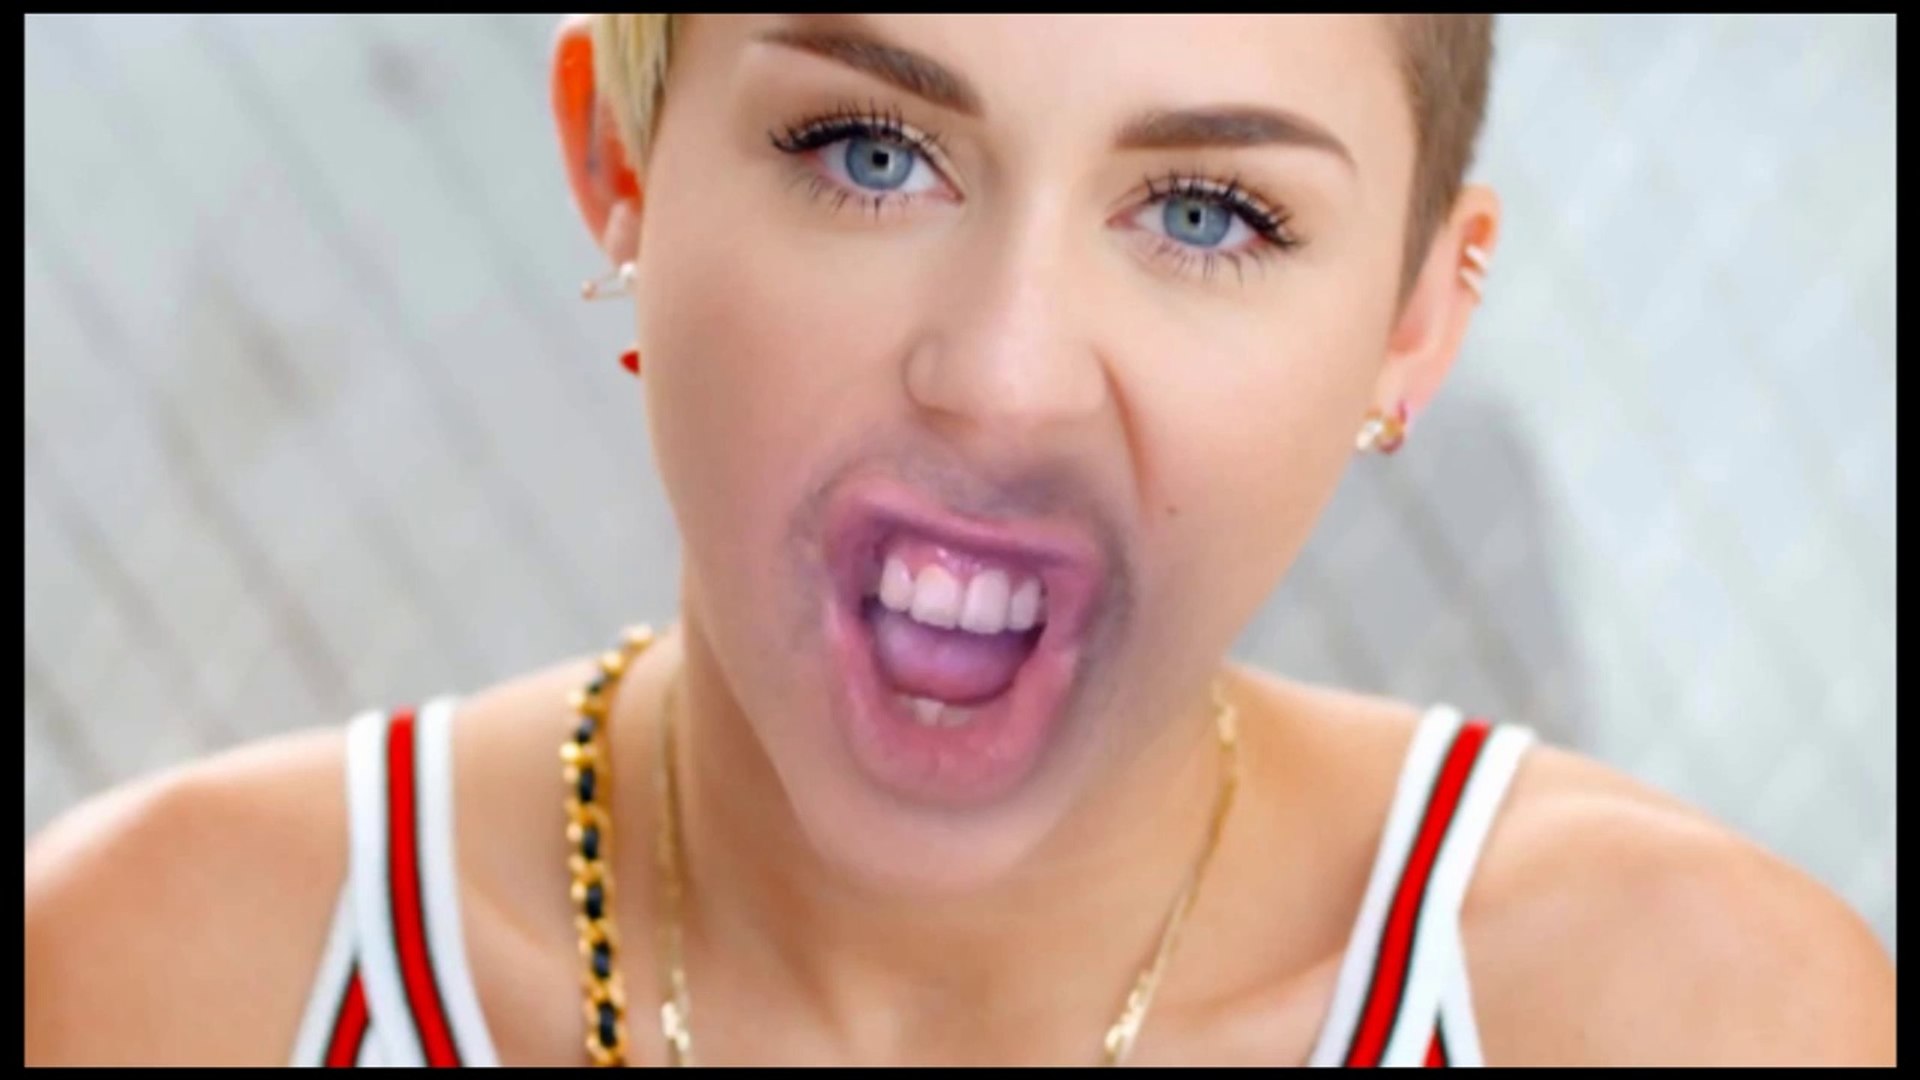 Miley Cyrus - Performance with the tongue